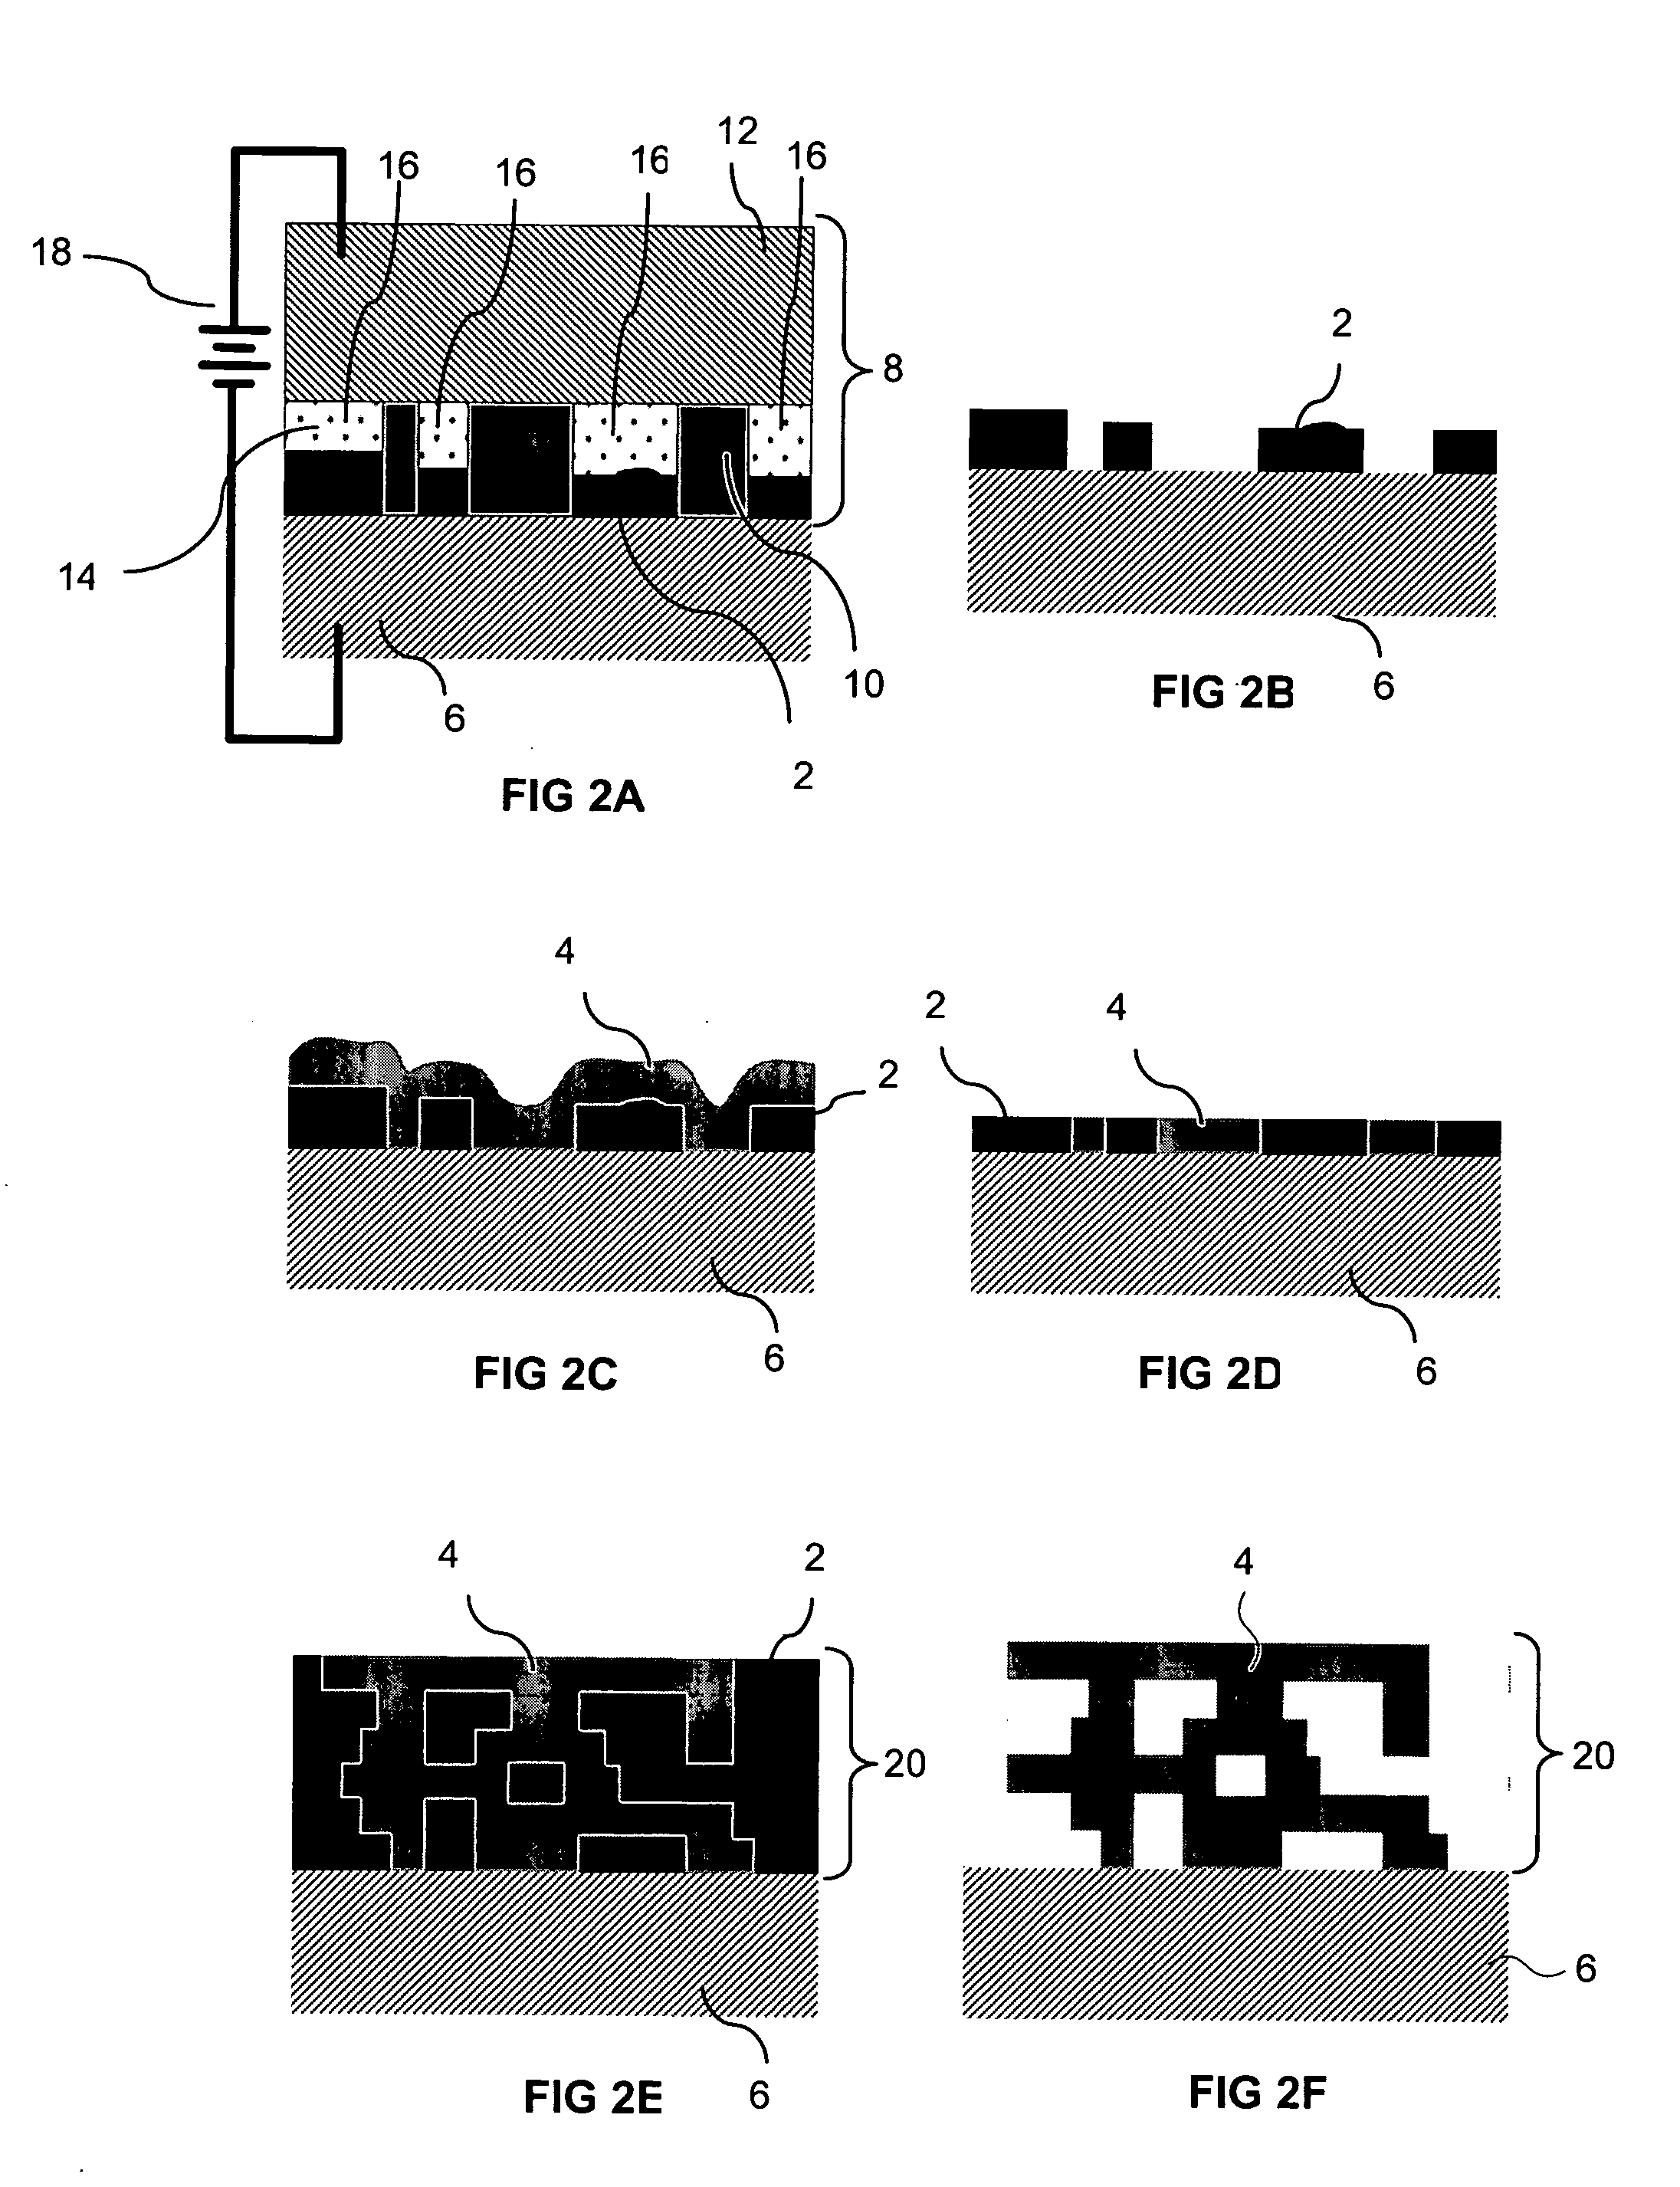 Electrochemical fabrication process including process monitoring, making corrective action decisions, and taking appropriate actions